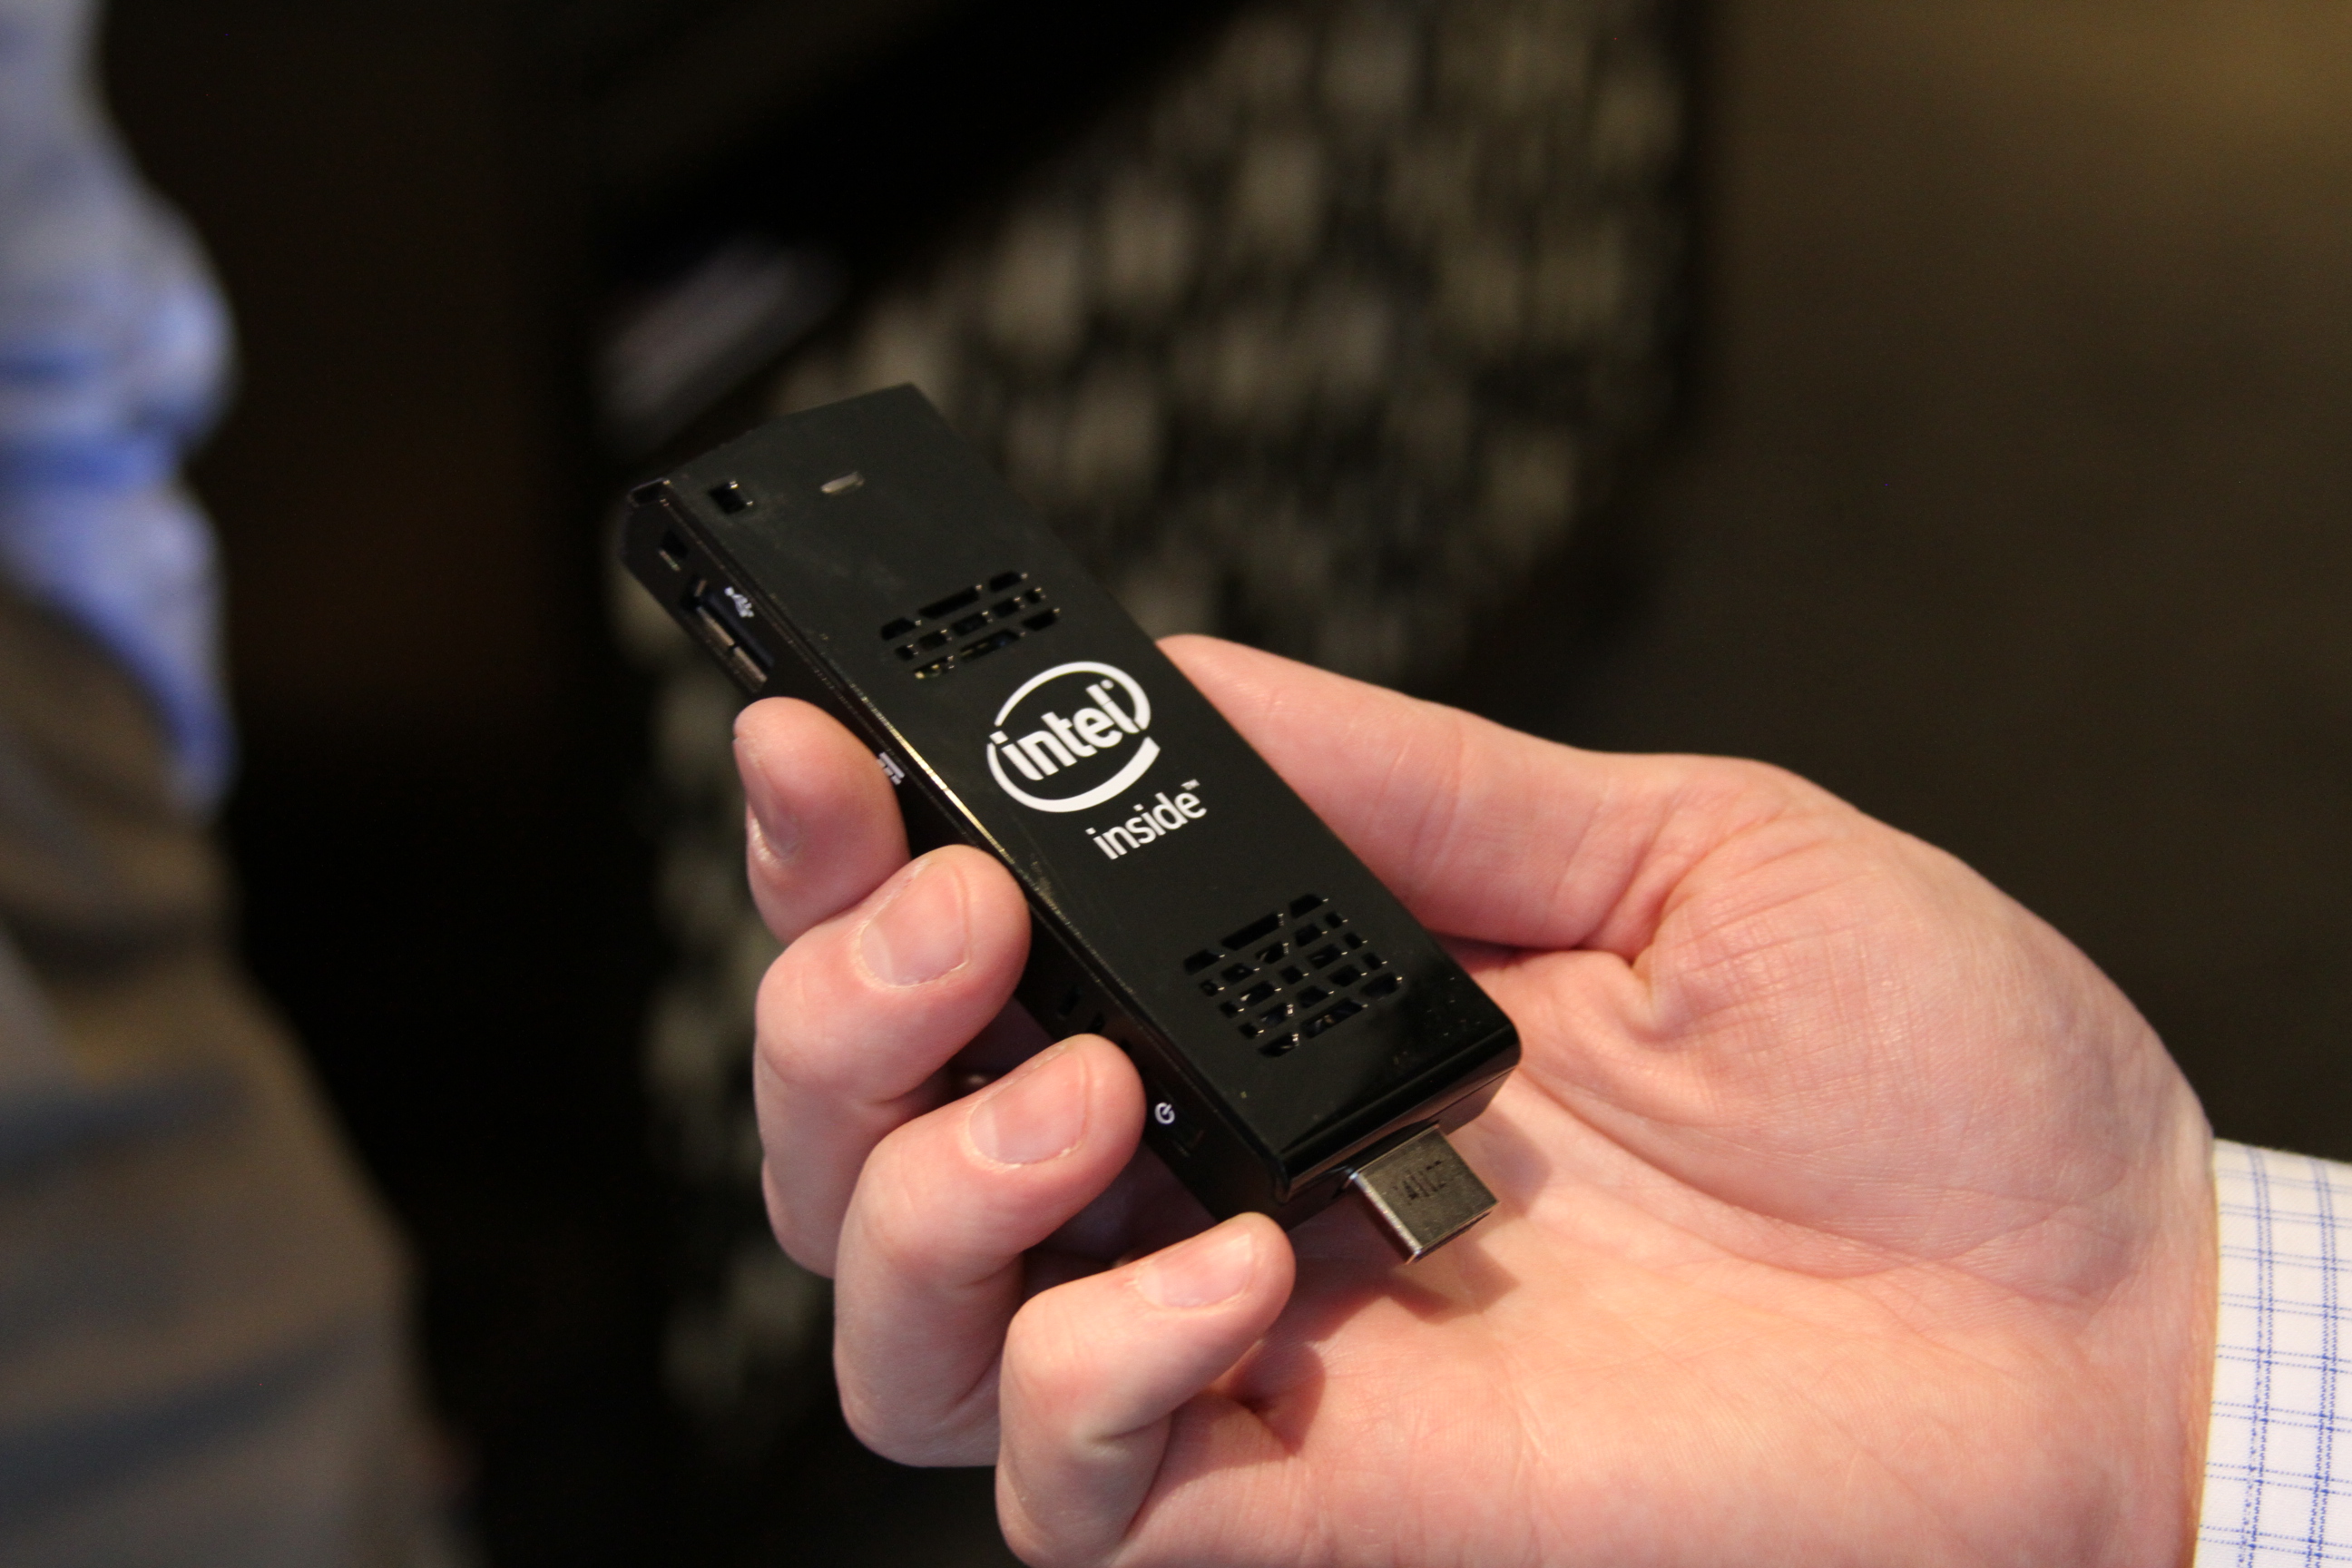 Intel: The PC-On-A-Stick Revolution Is Here - Intel Corporation ...